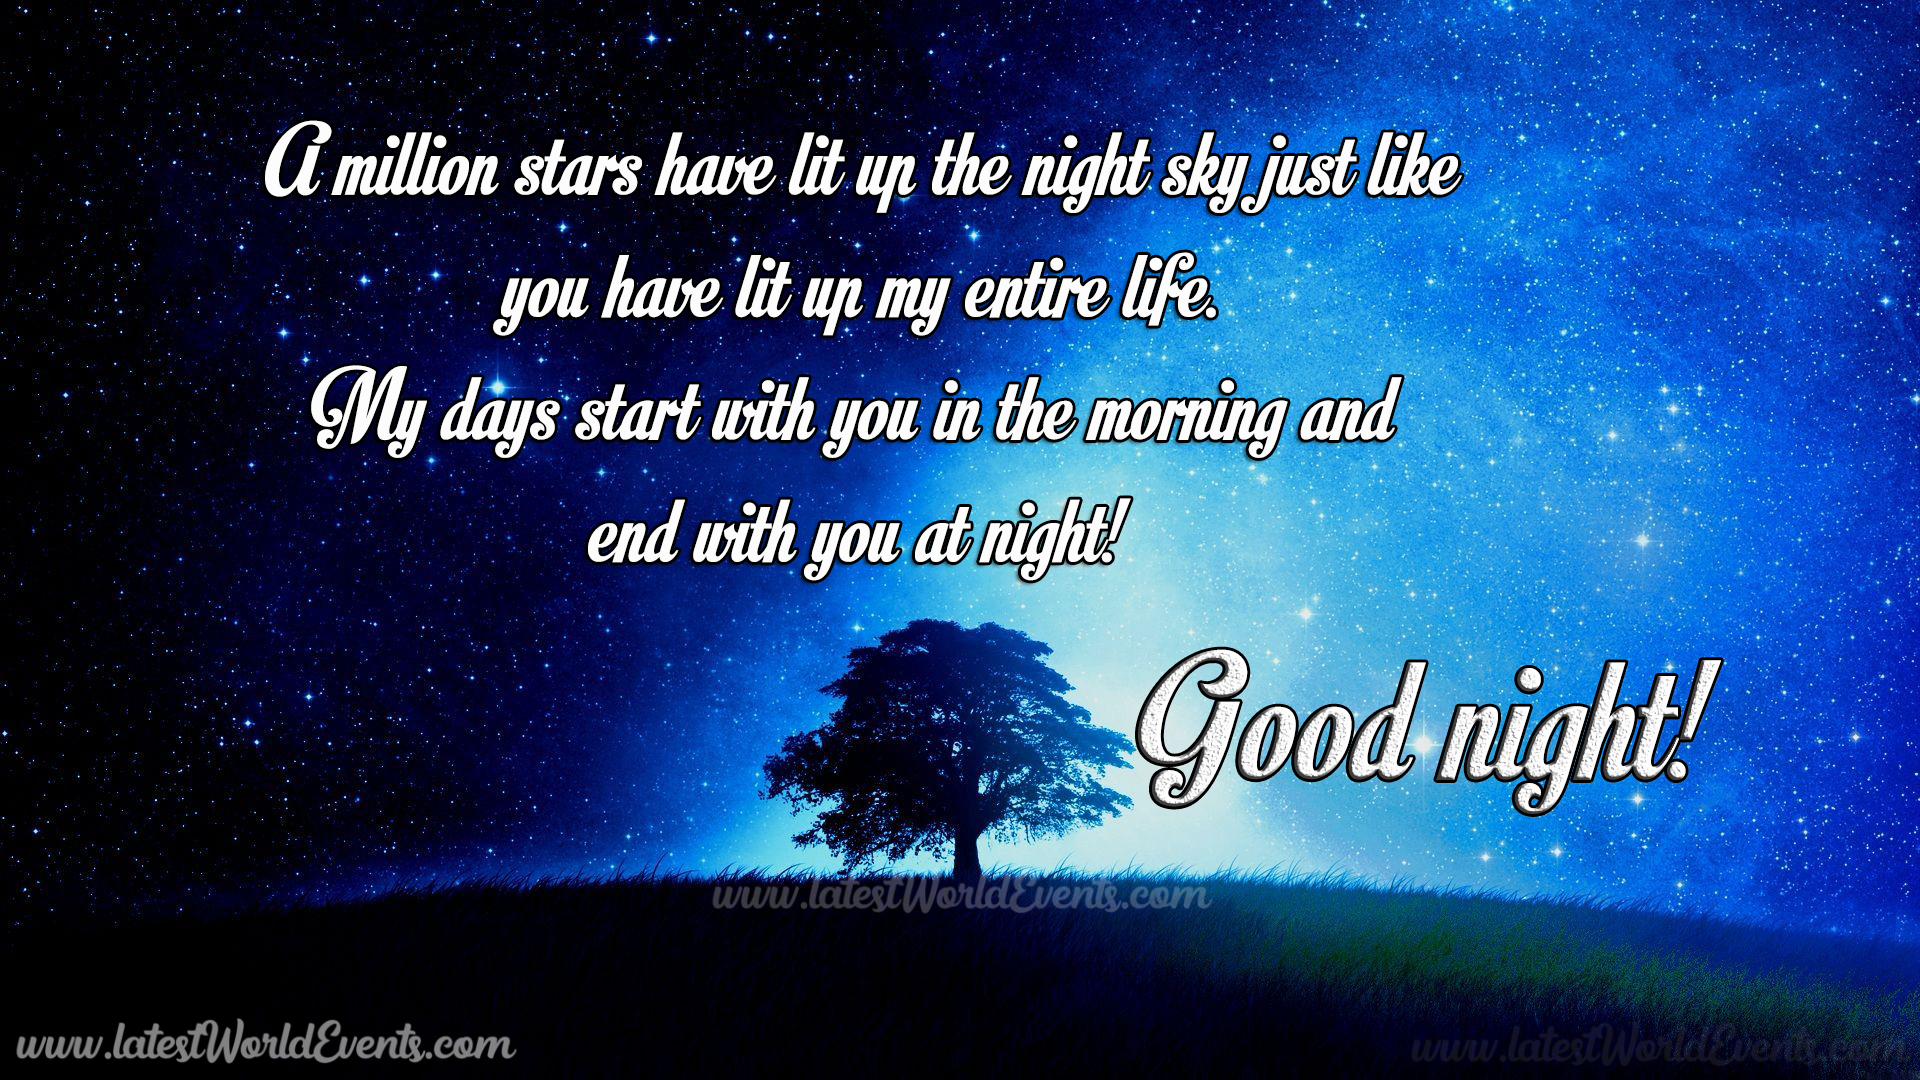 Inspirational Good Night Quotes - Latest World Events